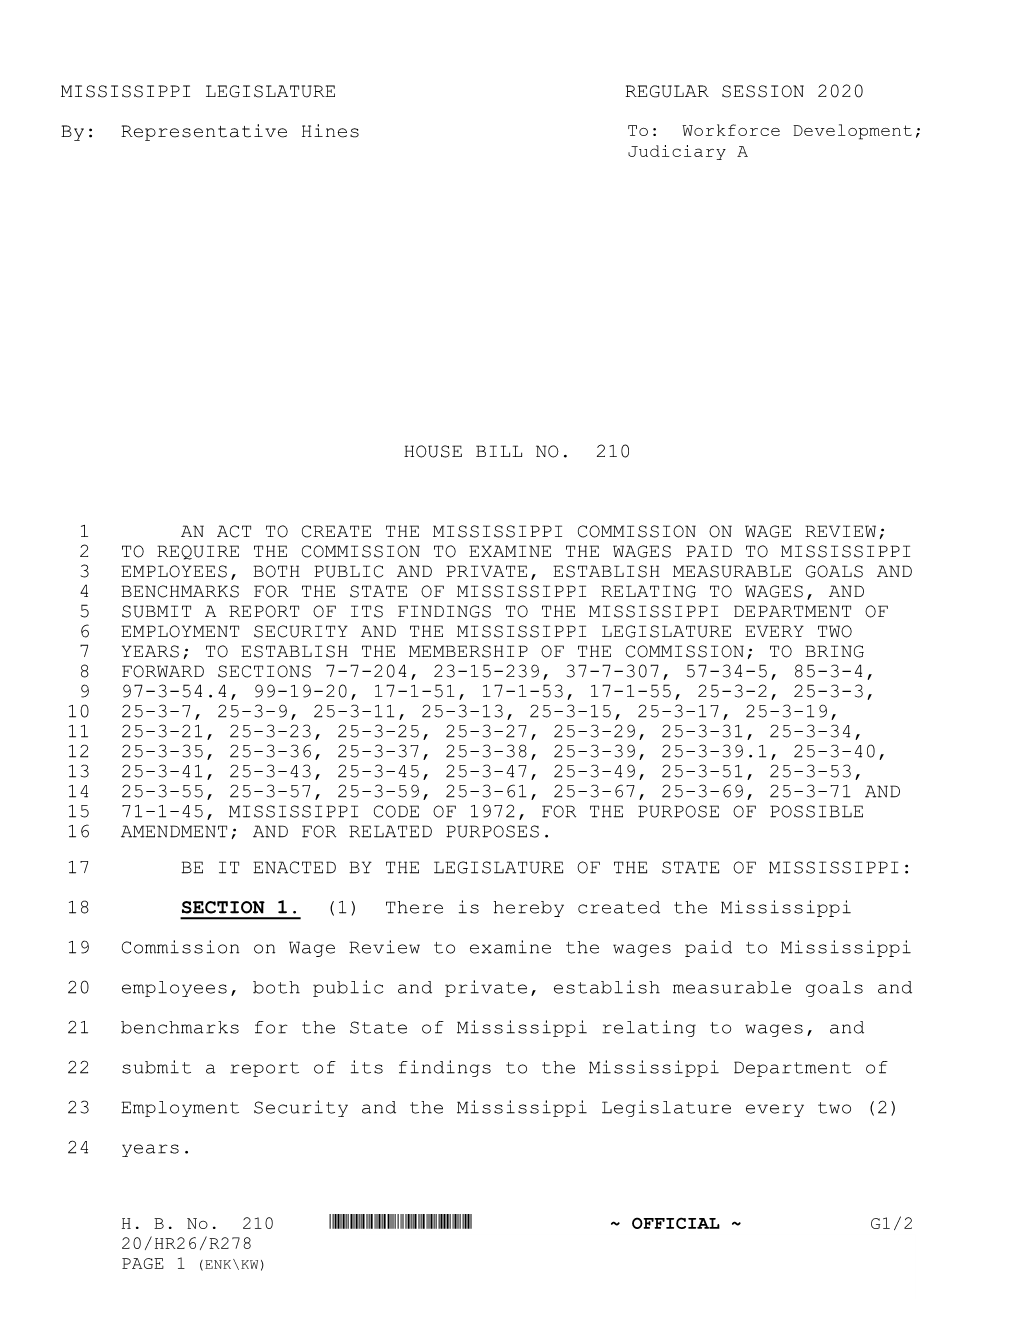 MISSISSIPPI LEGISLATURE REGULAR SESSION 2020 By: Representative Hines HOUSE BILL NO. 210 an ACT to CREATE the MISSISSIPP